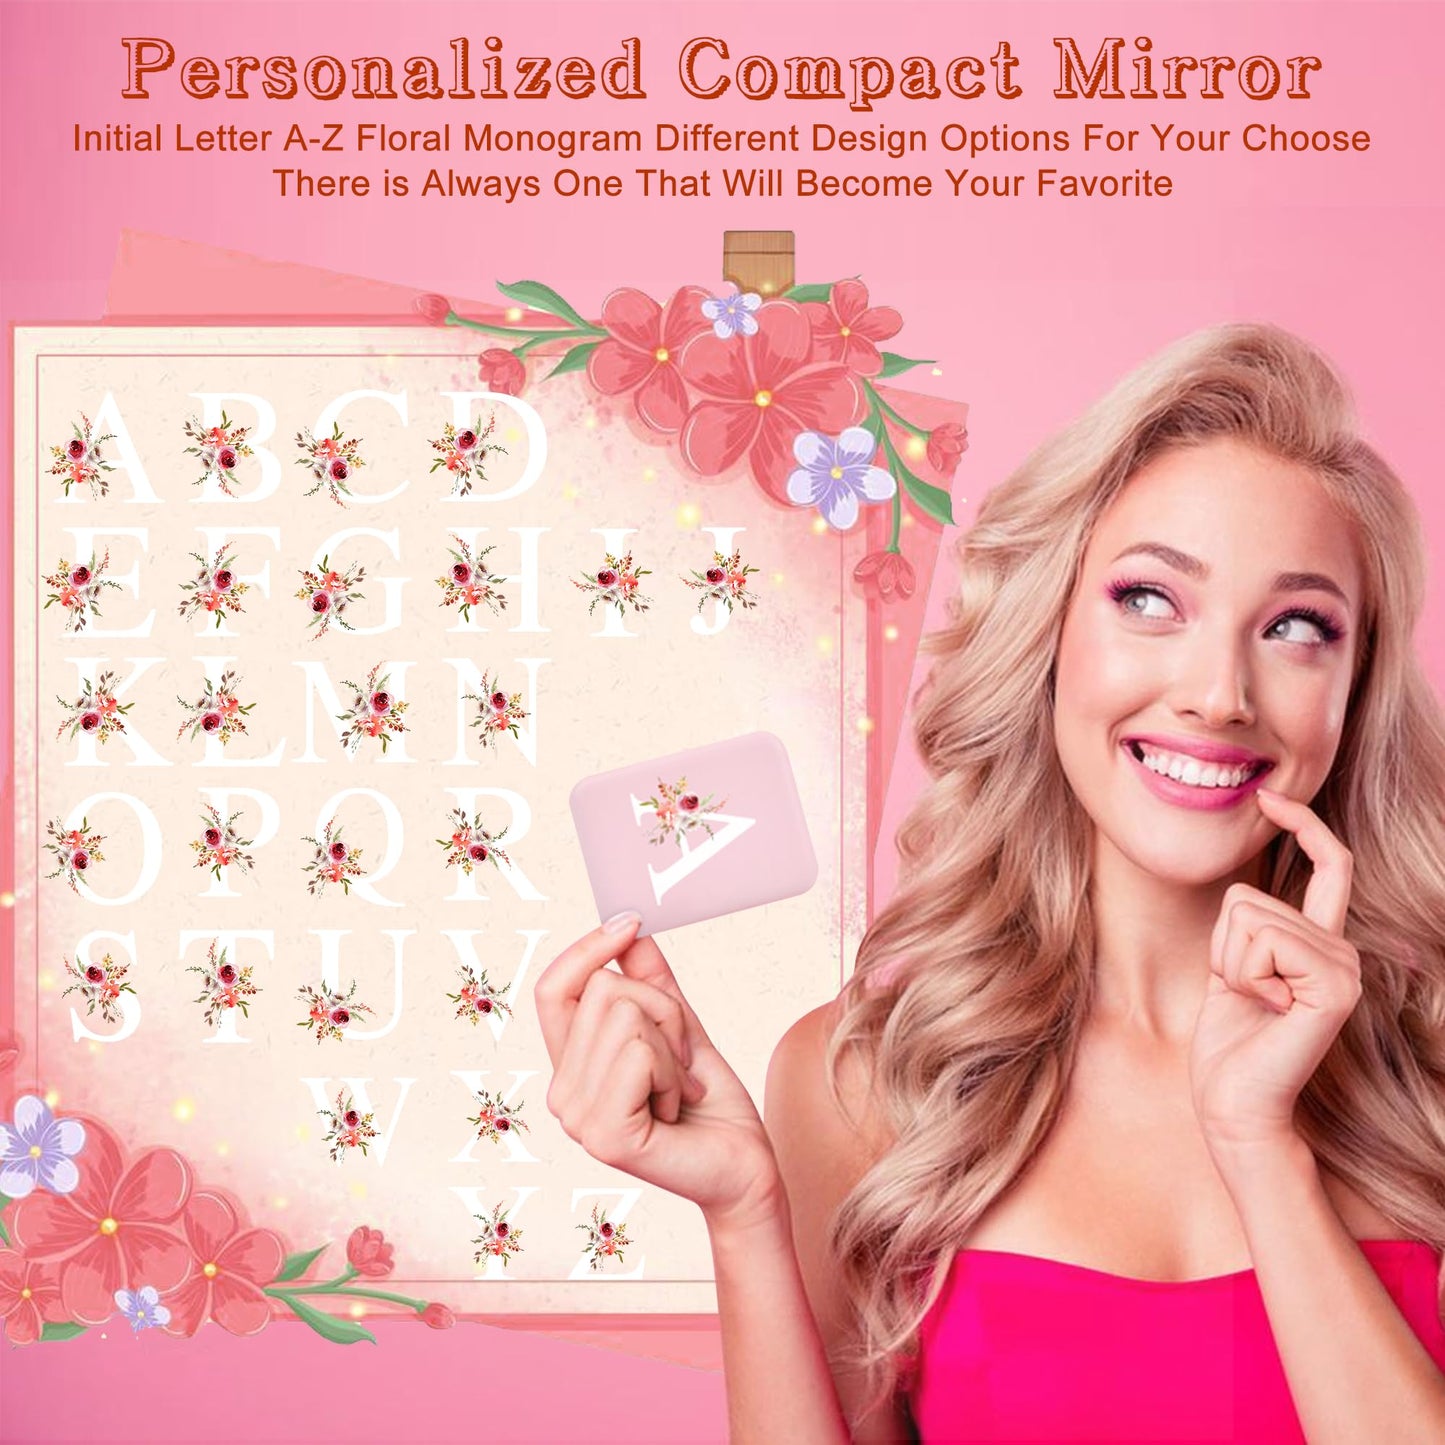 Personalized Gifts for Women Initial compact mirror with Light,Preppy Stuff LED mirror 1X/3X magnifying mirror,Travel mirror,Mini Makeup mirror,Folding Pocket Mirror for Girls Women Bridesmaid Gifts